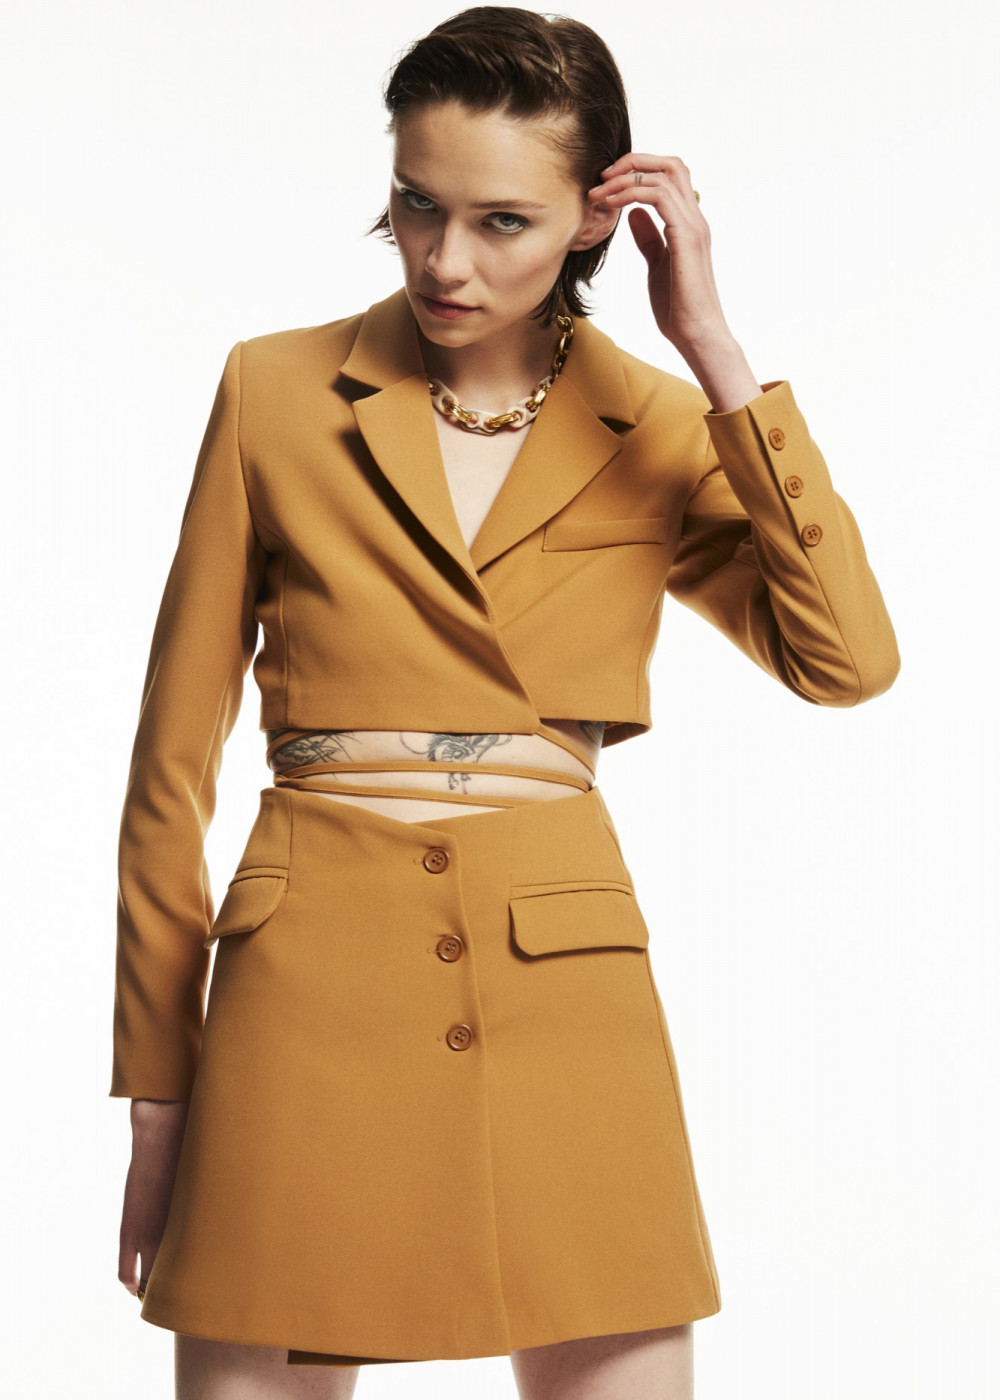 Tie Down Cropped Jacket - Skirt Suit